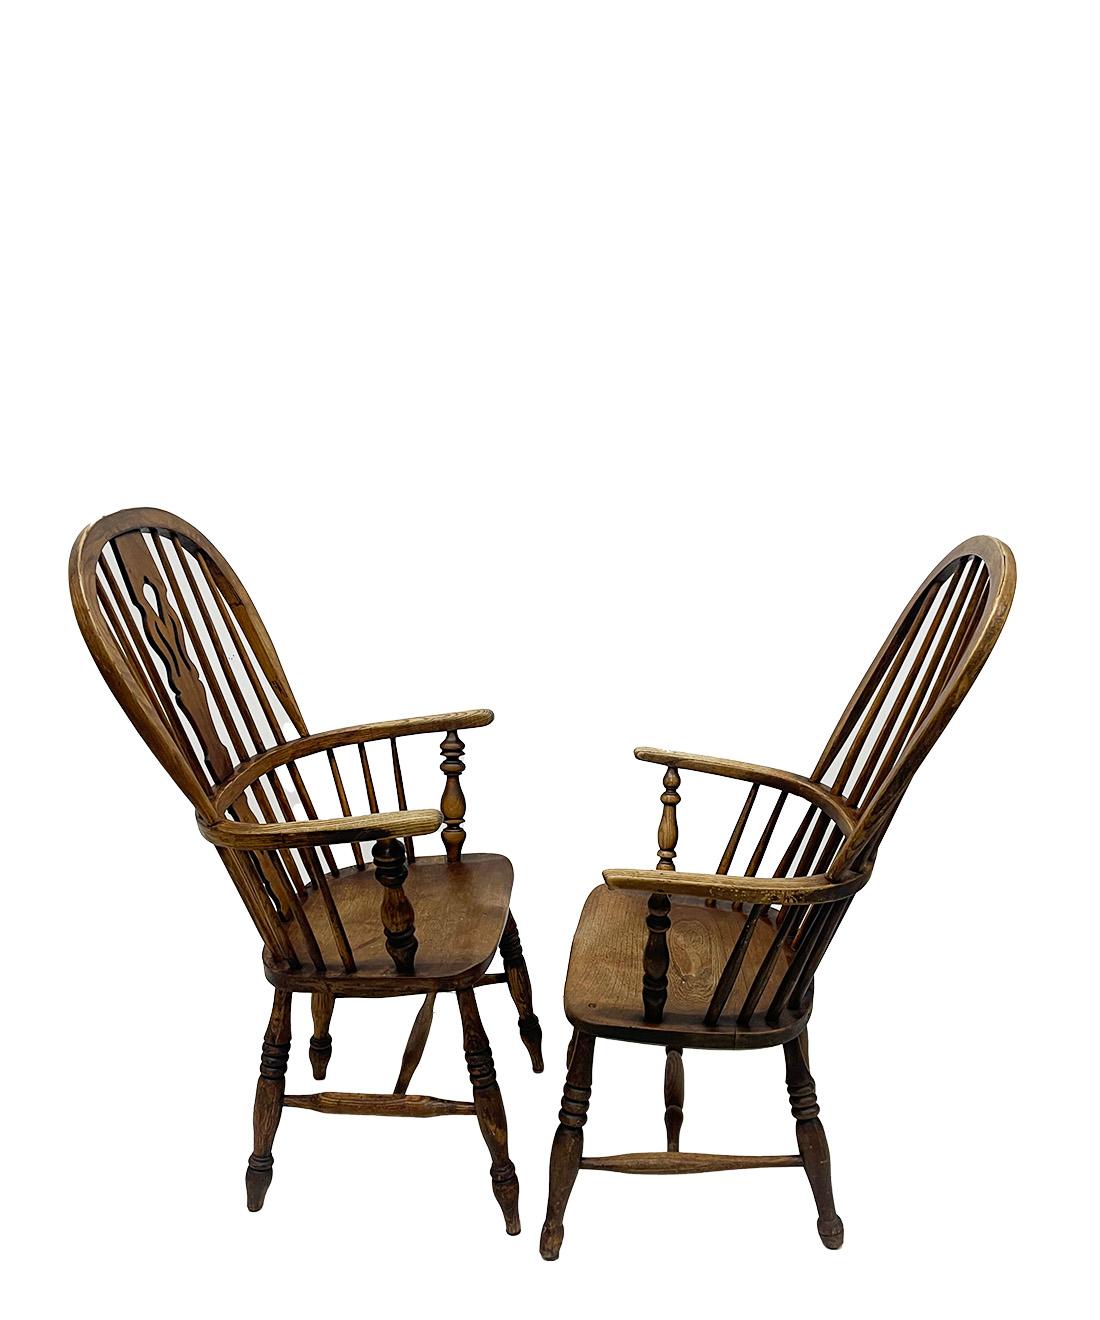 English 19th Century Windsor armchairs

A set of oak Windsor chairs with a high, rounded back with bars. The chairs with round curved armrests on 4 twisted oak wood legs with a single H connection. The seats of the chairs have a saddle-shaped seat.